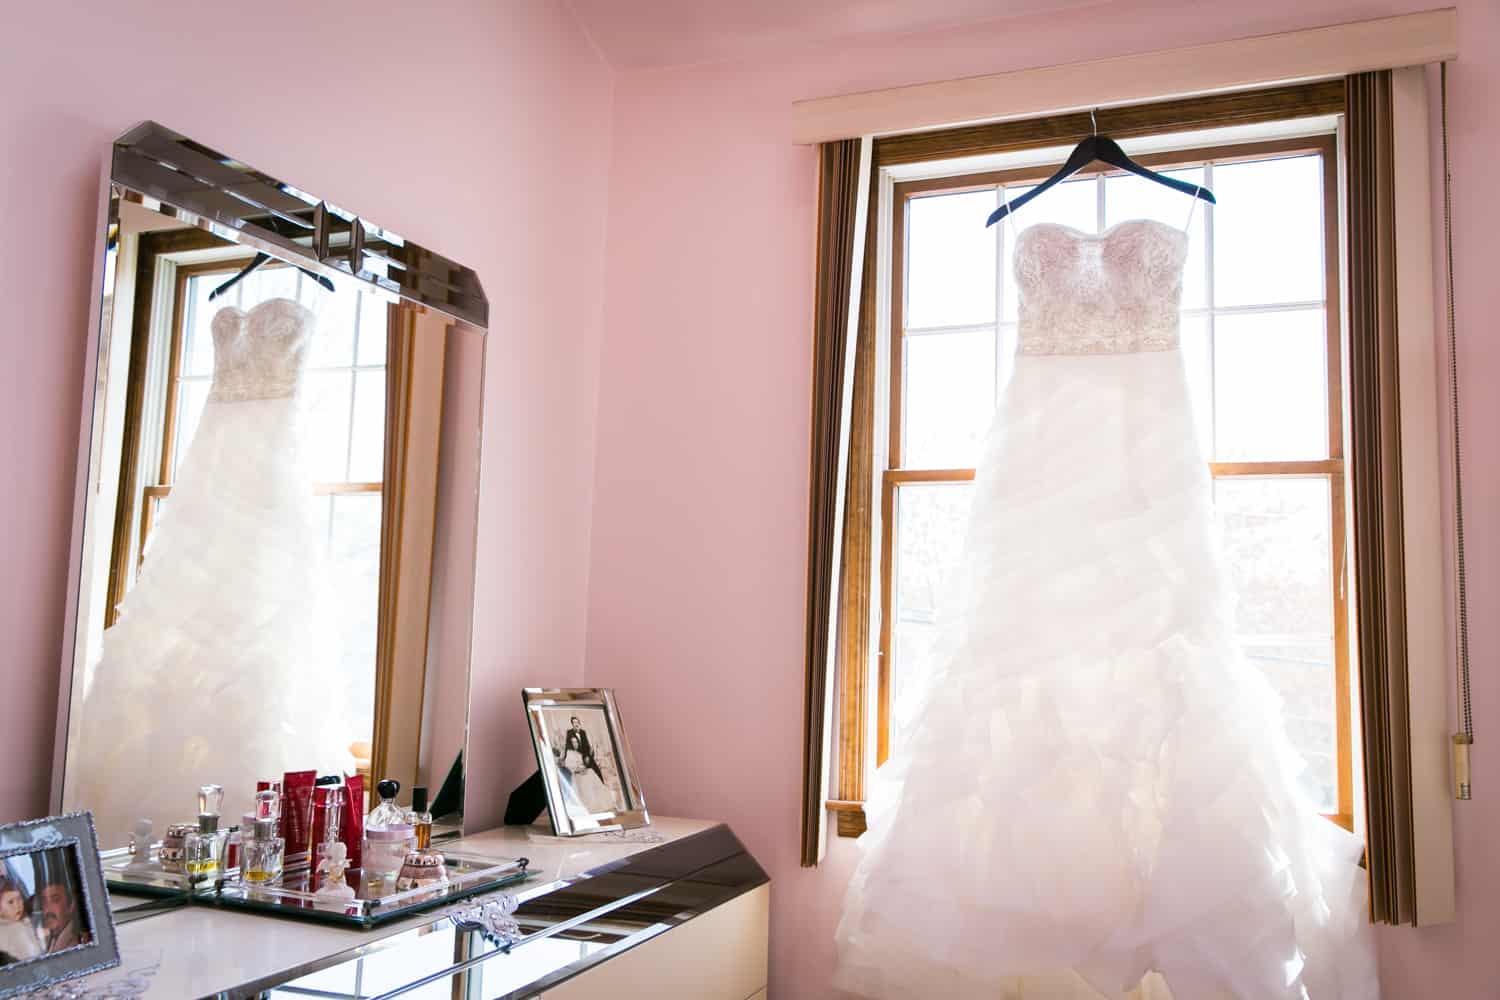 Wedding dress hanging in window and reflected in mirror for an article called 'Do you need a second photographer?'